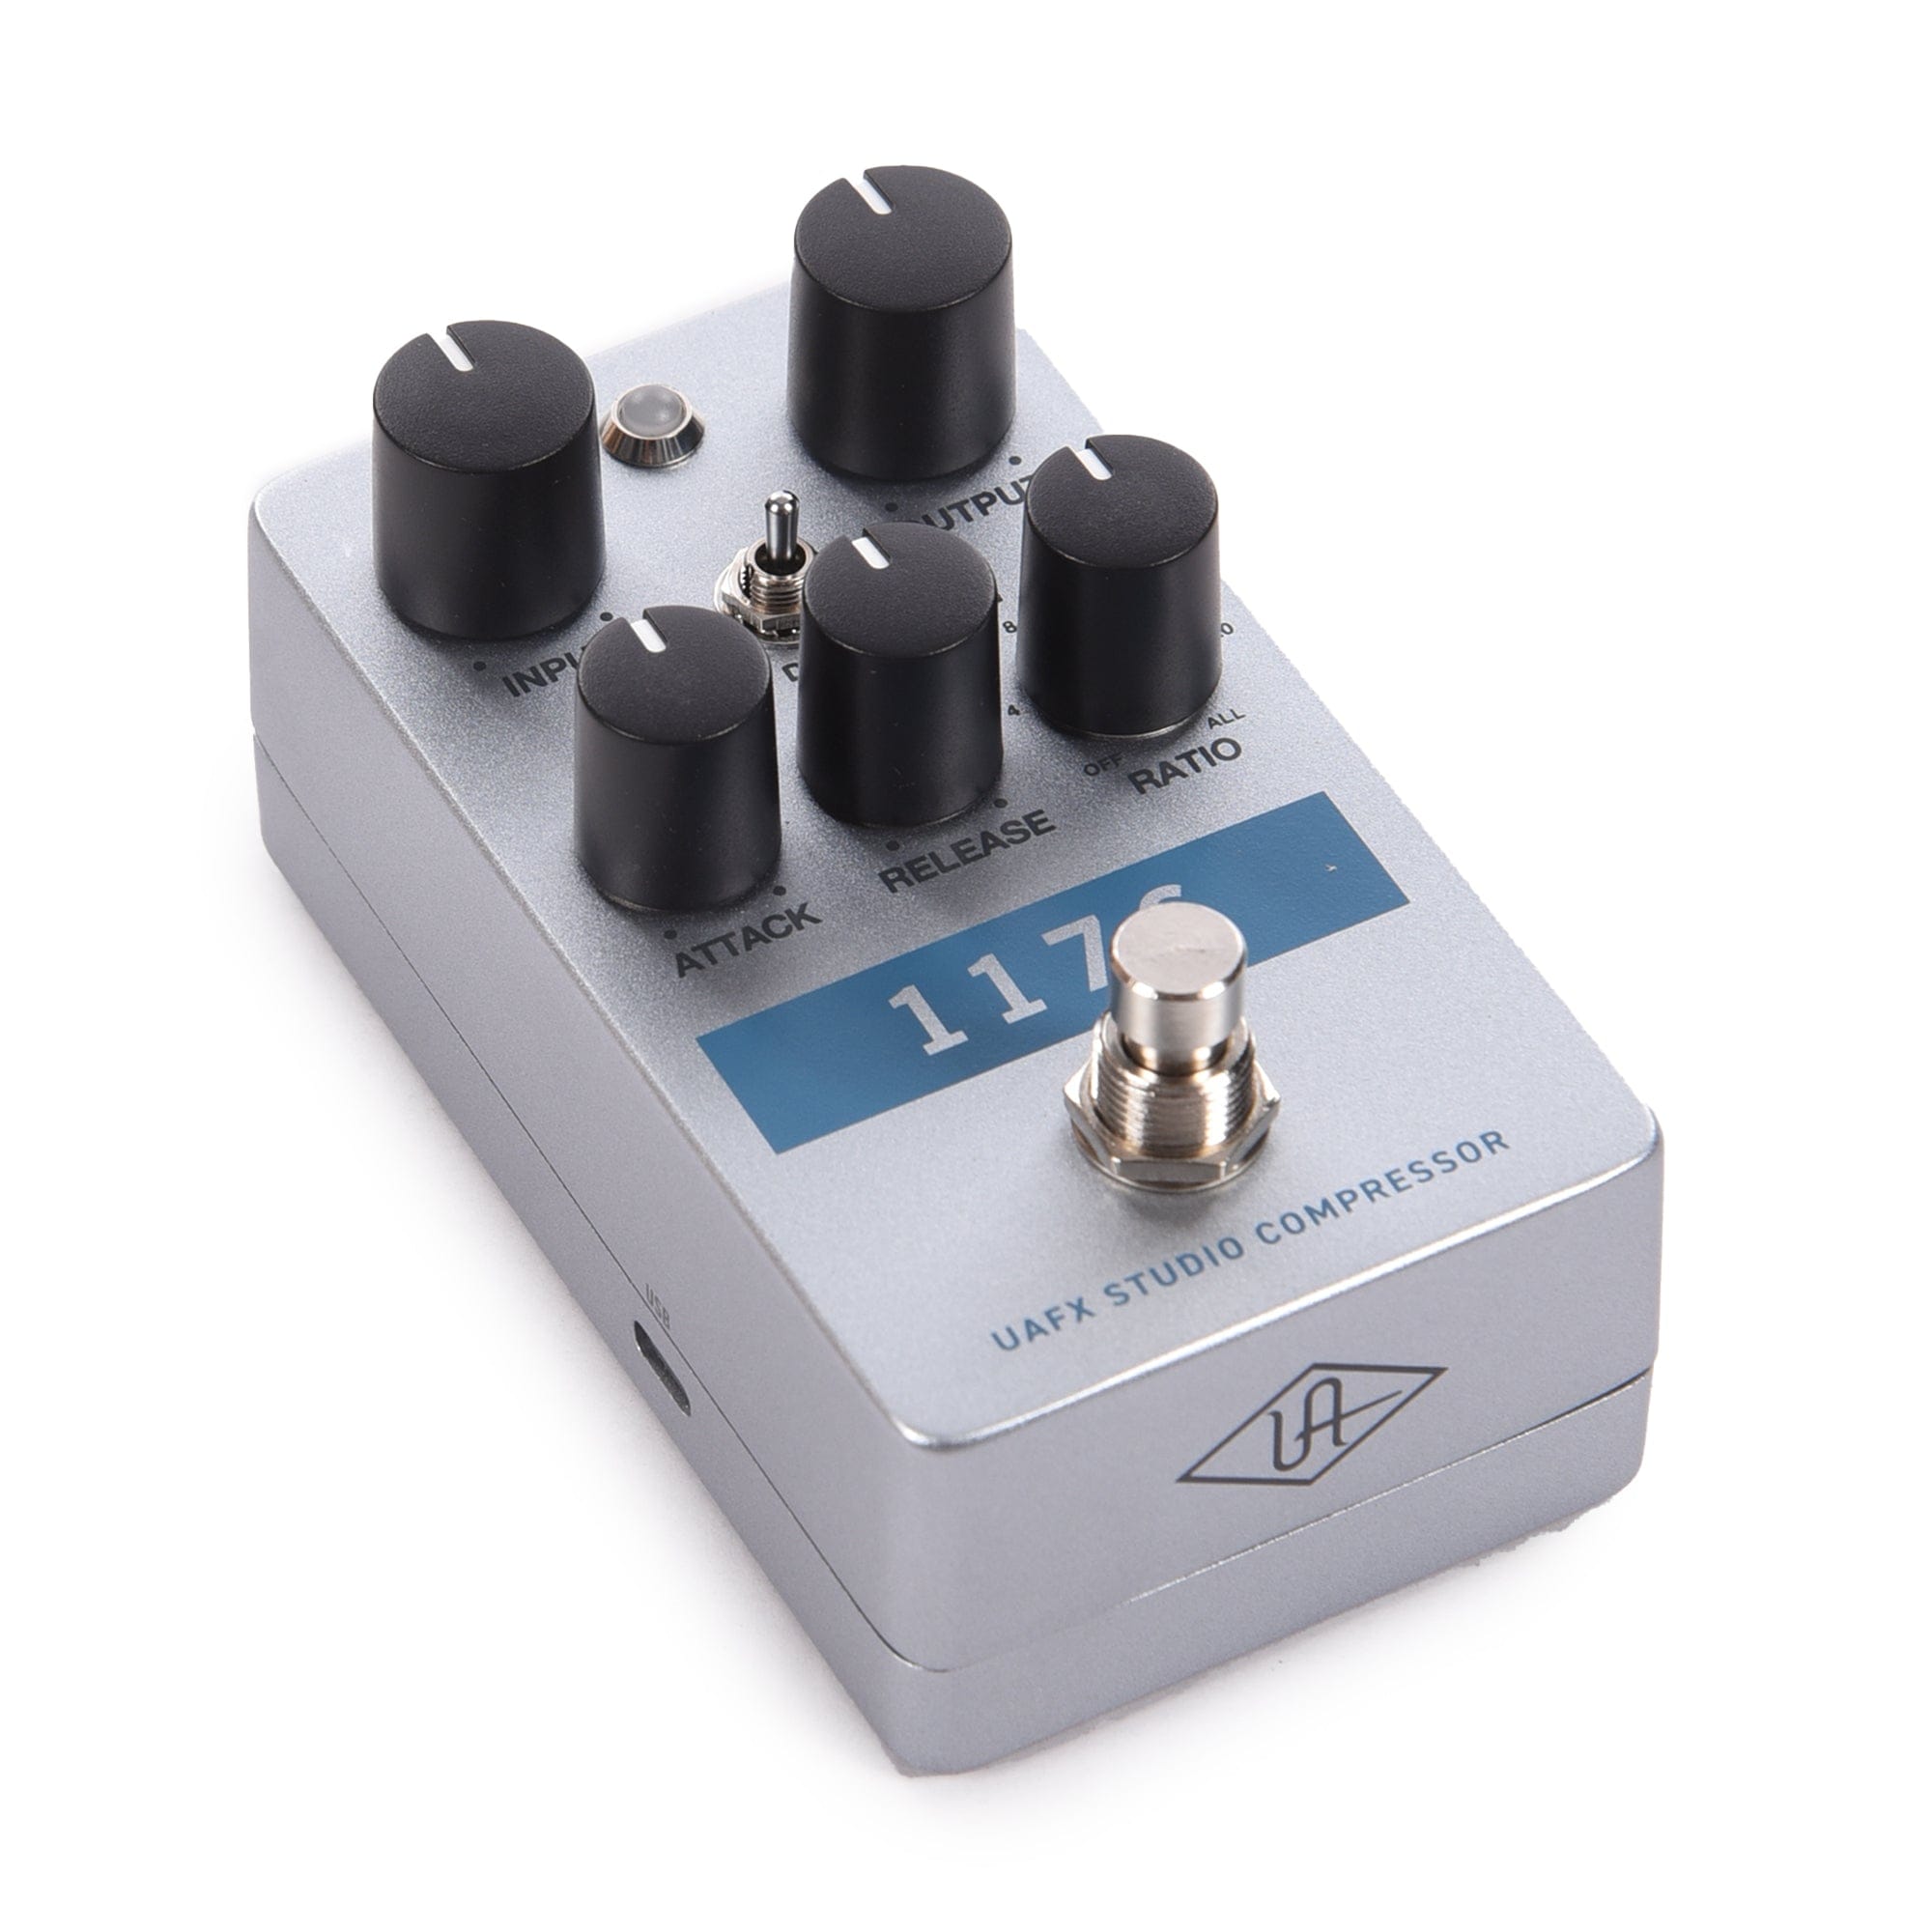 Universal Audio 1176 Compressor Pedal Effects and Pedals / Compression and Sustain